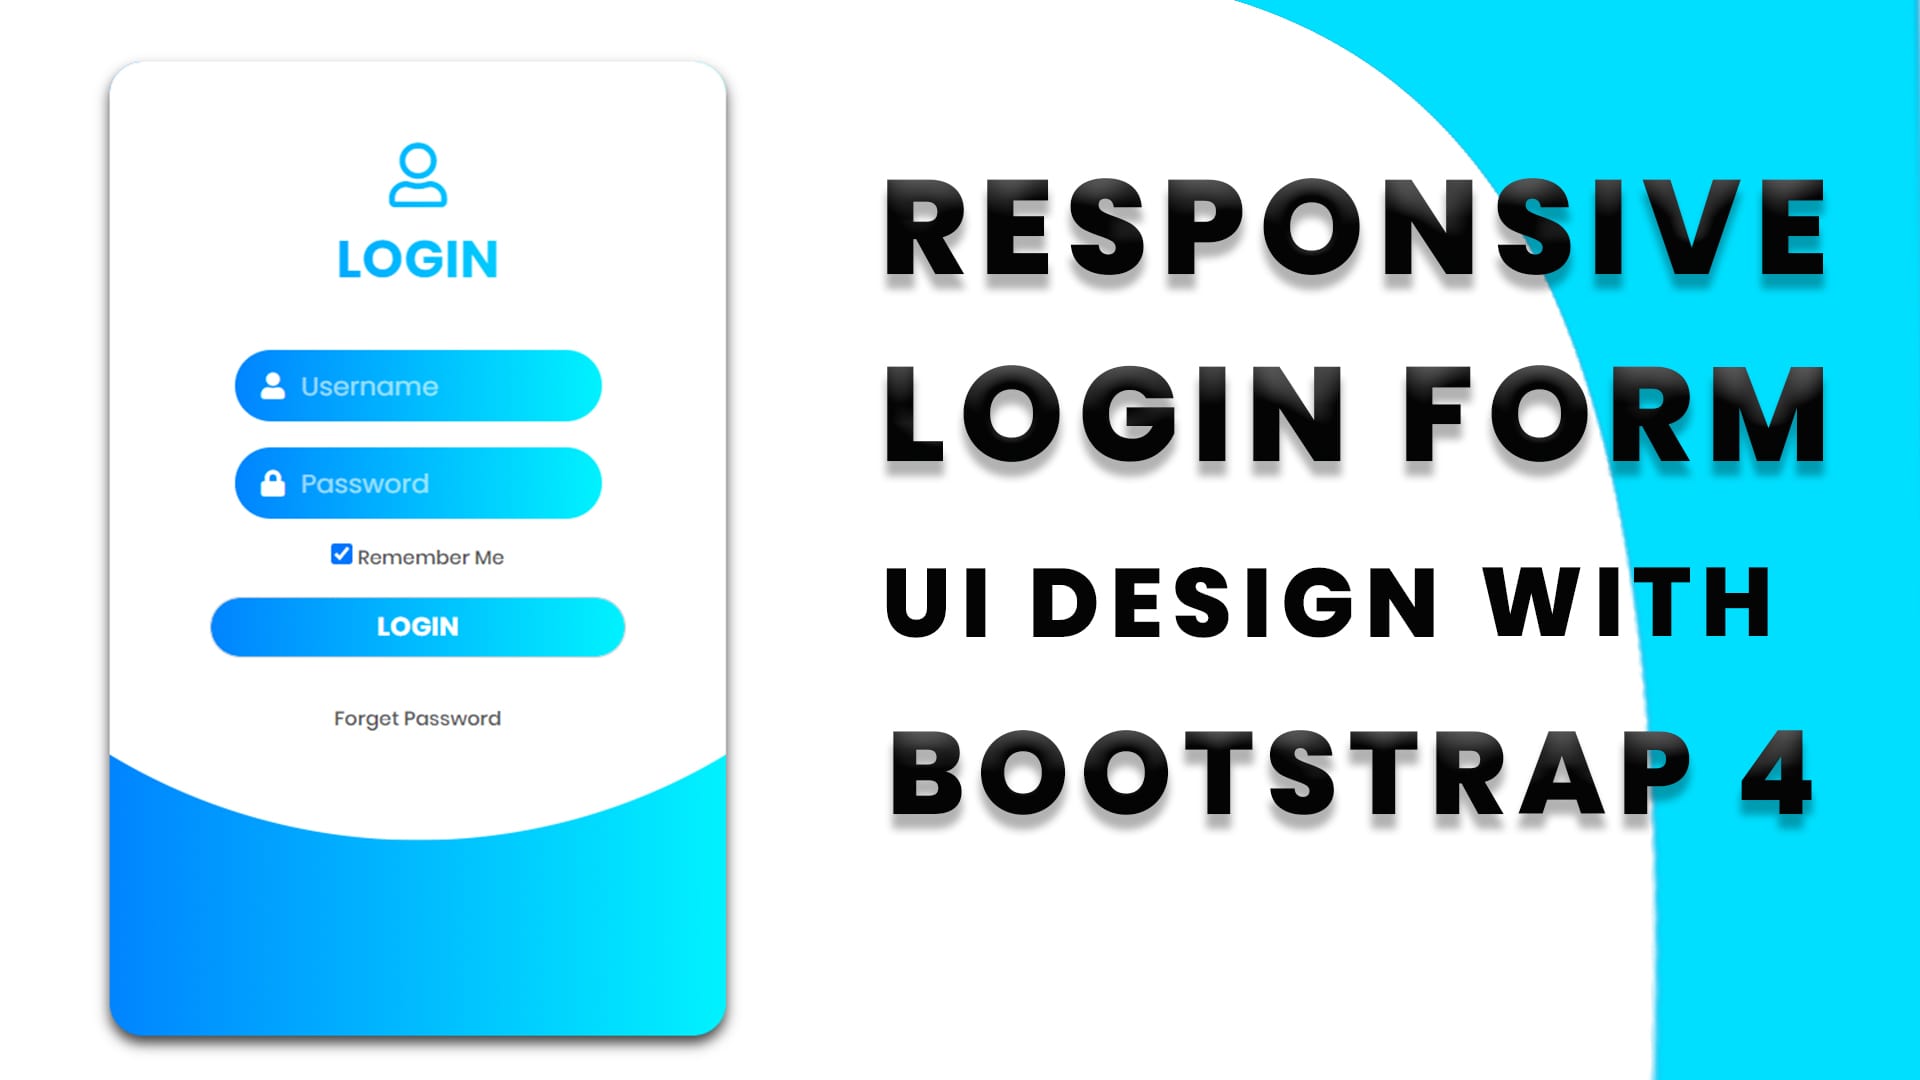 Login Form Design In Bootstrap 4 Modal Html Amp Css Code4education Riset